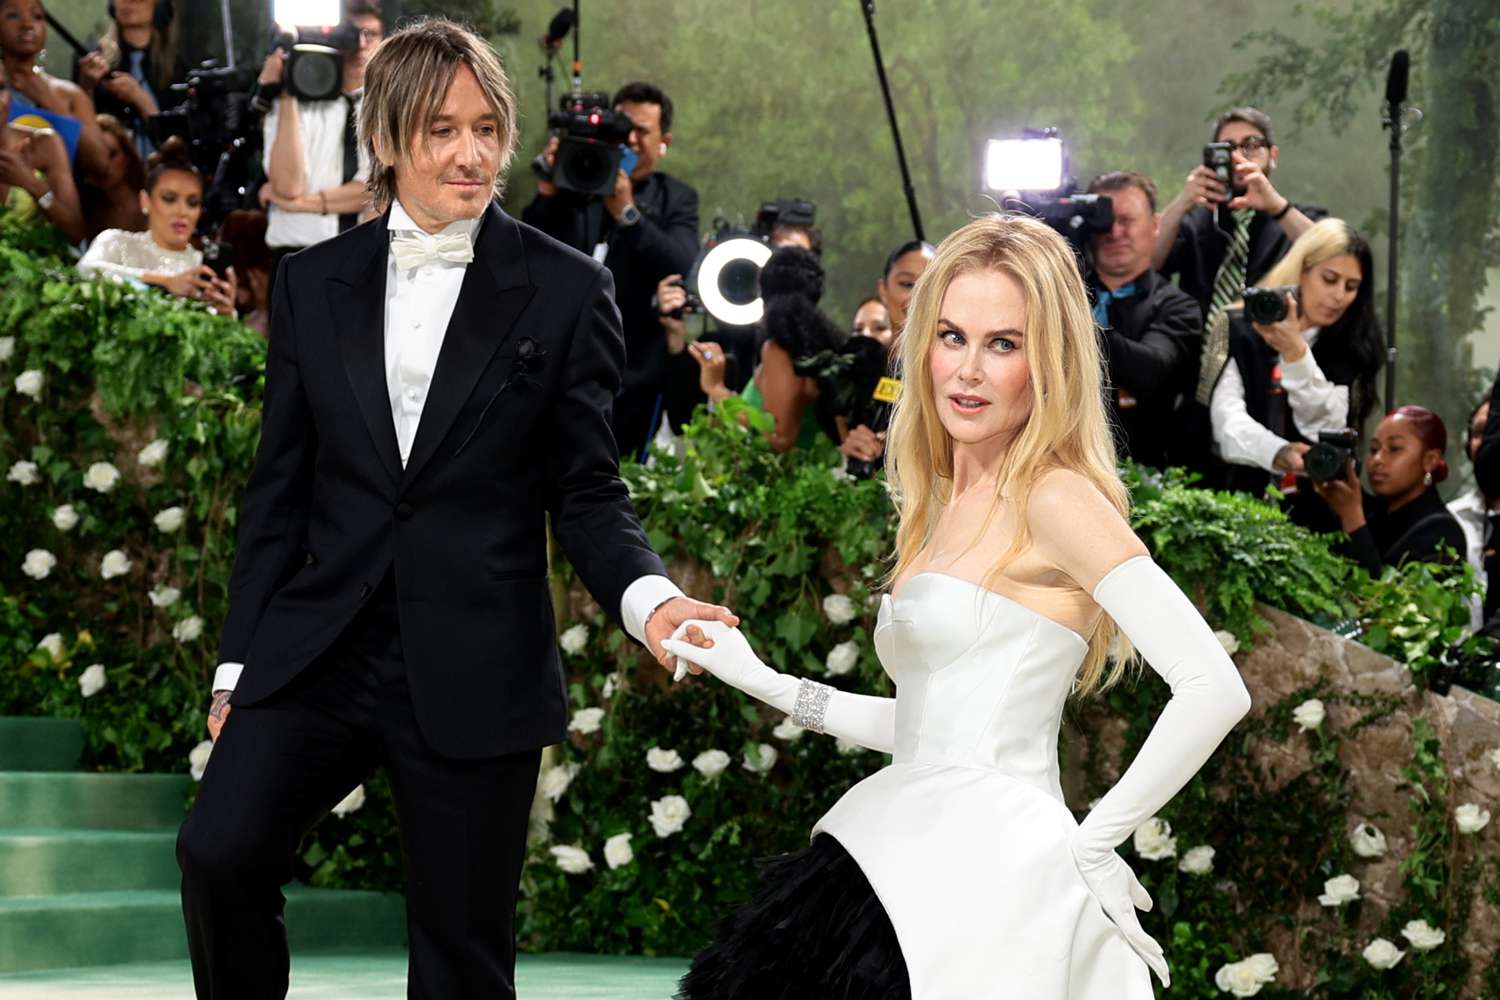 Nicole Kidman Reveals the 'Greatest' Relationship Advice She Has Received as She Discusses Marriage to Keith Urban